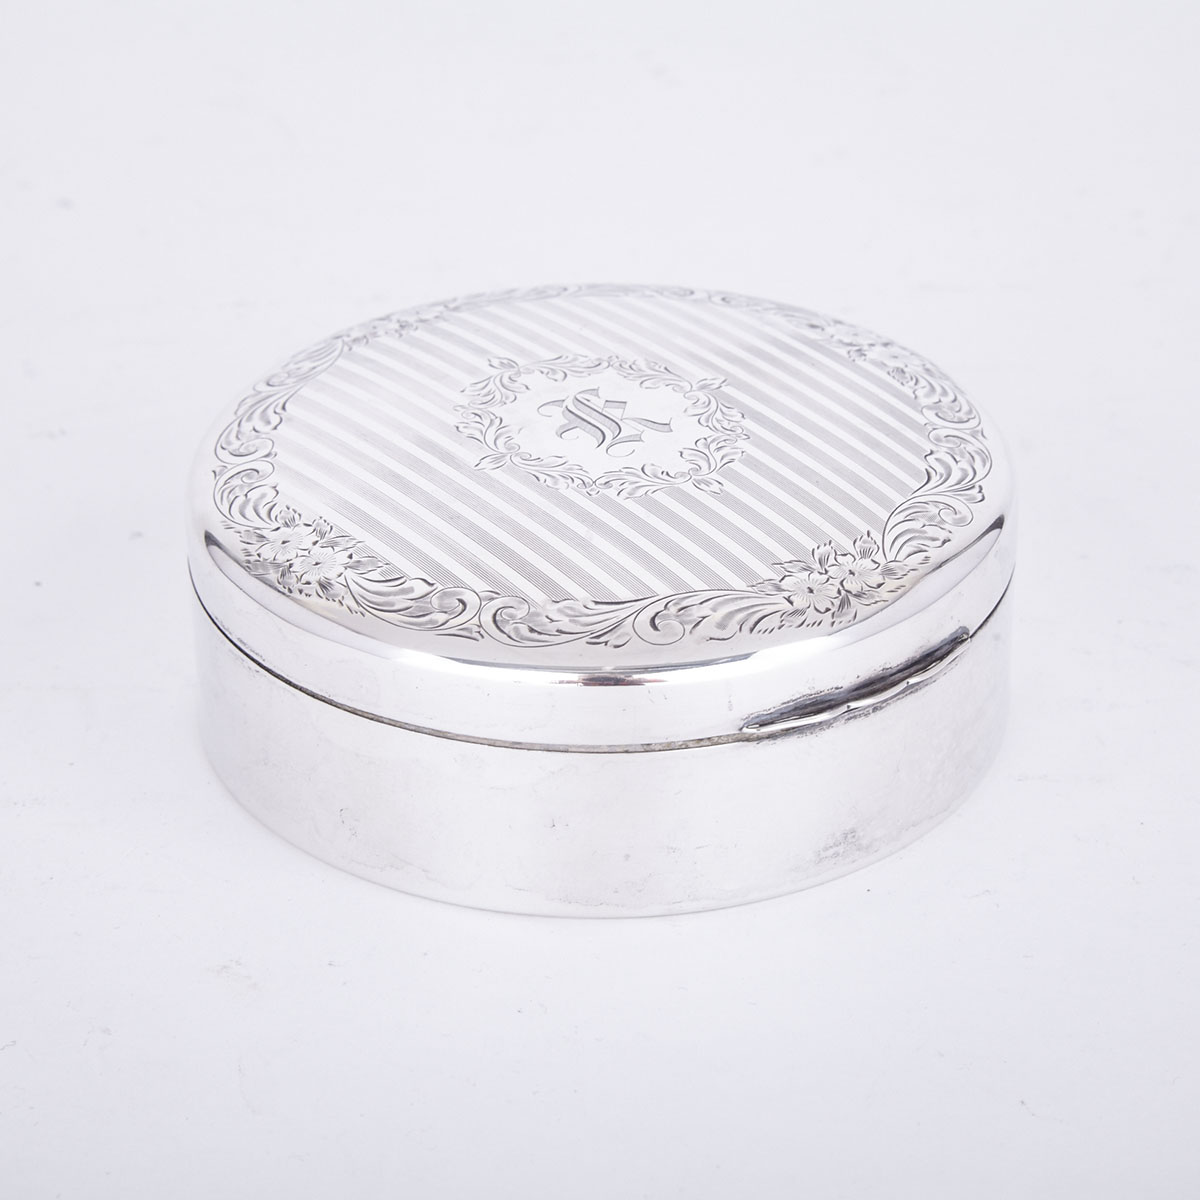 Canadian Silver Circular Jewellery Box, Henry Birks & Sons, Montreal, c.1904-24